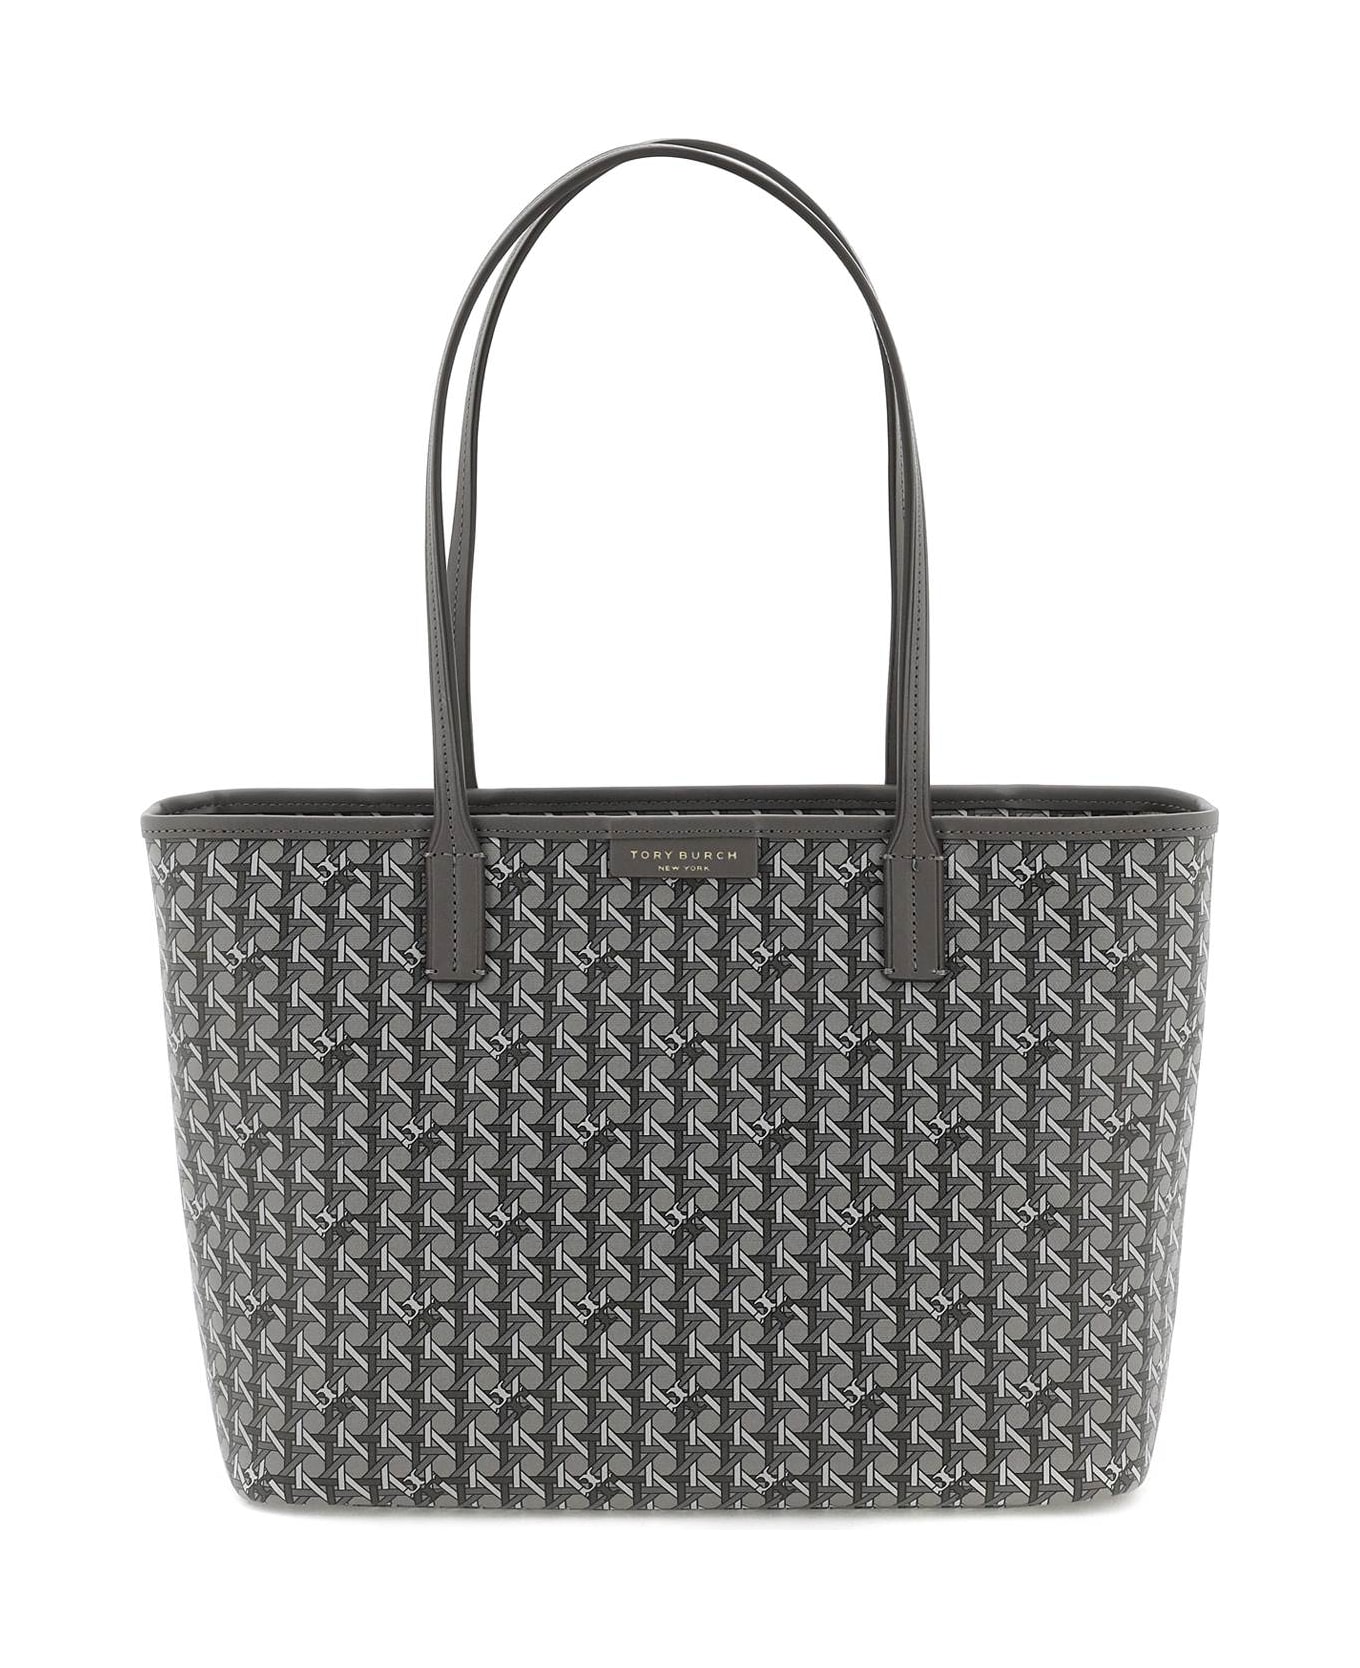 Tory Burch Ever-ready Small Tote - ZINC (Grey)